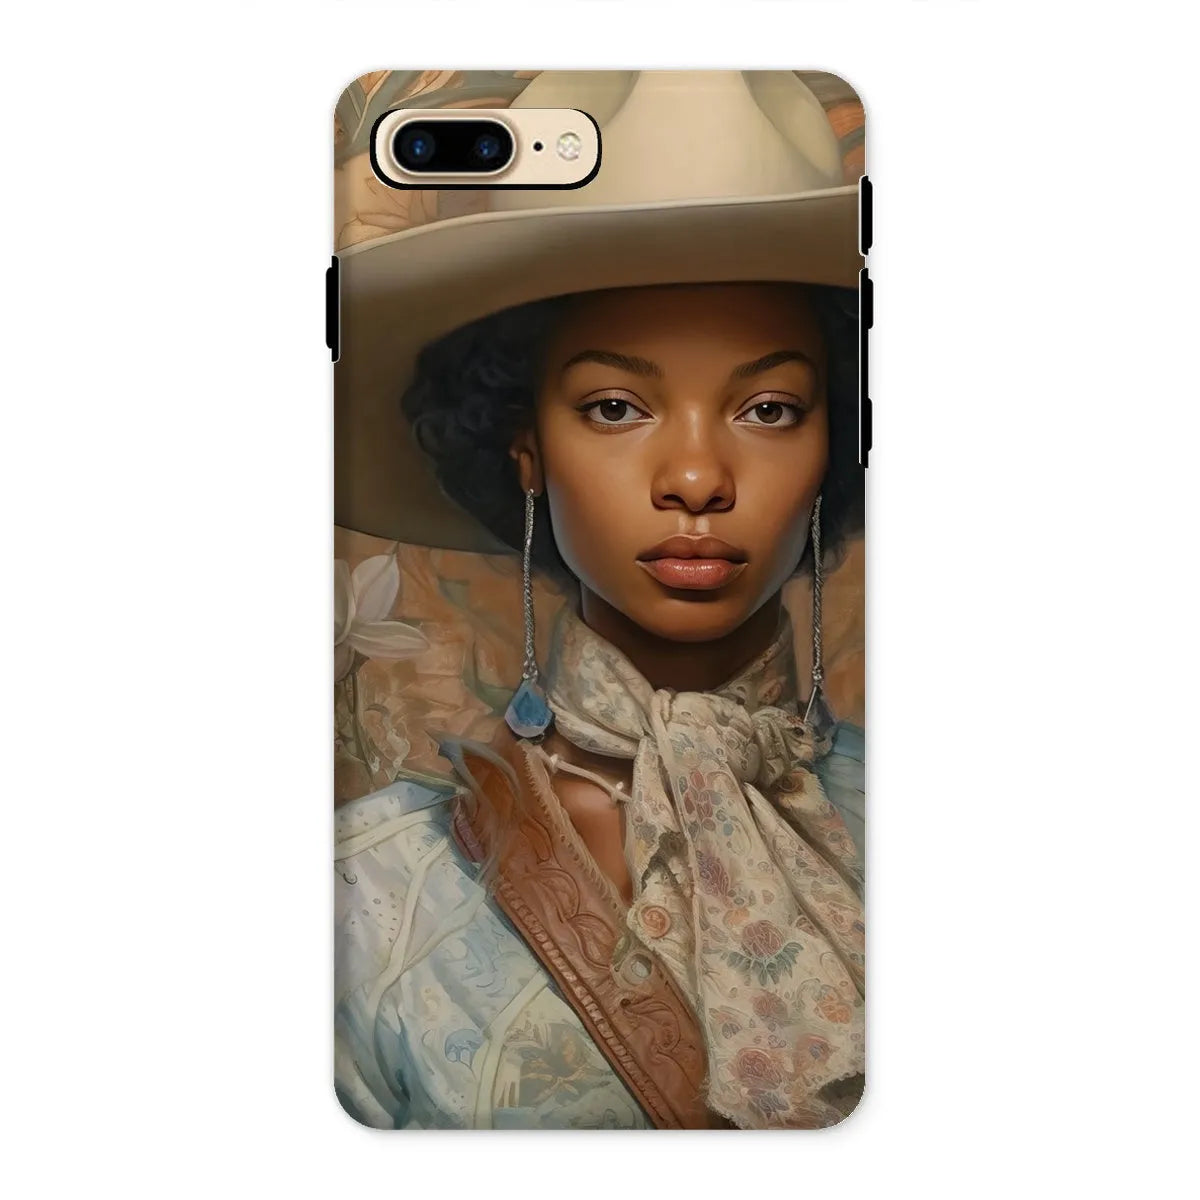 Imani The Lesbian Cowgirl - Sapphic Art Phone Case - Iphone 8 Plus / Matte - Mobile Phone Cases - Aesthetic Art